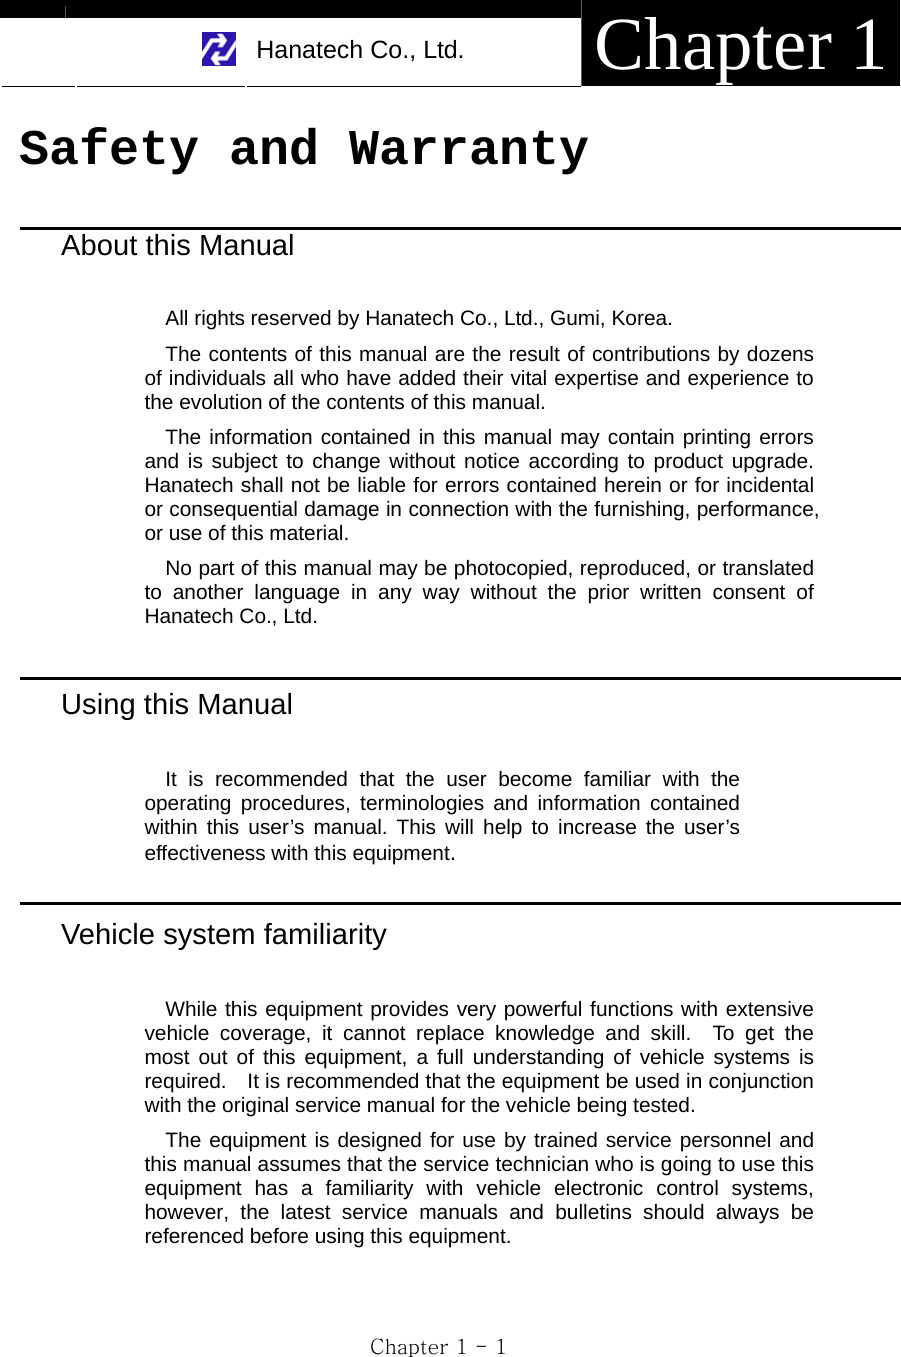     Hanatech Co., Ltd.  Chapter 1 Chapter 1 - 1 Safety and Warranty  About this Manual  All rights reserved by Hanatech Co., Ltd., Gumi, Korea. The contents of this manual are the result of contributions by dozens of individuals all who have added their vital expertise and experience to the evolution of the contents of this manual. The information contained in this manual may contain printing errors and is subject to change without notice according to product upgrade.  Hanatech shall not be liable for errors contained herein or for incidental or consequential damage in connection with the furnishing, performance, or use of this material. No part of this manual may be photocopied, reproduced, or translated to another language in any way without the prior written consent of Hanatech Co., Ltd.      Using this Manual  It is recommended that the user become familiar with the operating procedures, terminologies and information contained within this user’s manual. This will help to increase the user’s effectiveness with this equipment.  Vehicle system familiarity  While this equipment provides very powerful functions with extensive vehicle coverage, it cannot replace knowledge and skill.  To get the most out of this equipment, a full understanding of vehicle systems is required.    It is recommended that the equipment be used in conjunction with the original service manual for the vehicle being tested.     The equipment is designed for use by trained service personnel and this manual assumes that the service technician who is going to use this equipment has a familiarity with vehicle electronic control systems, however, the latest service manuals and bulletins should always be referenced before using this equipment. 